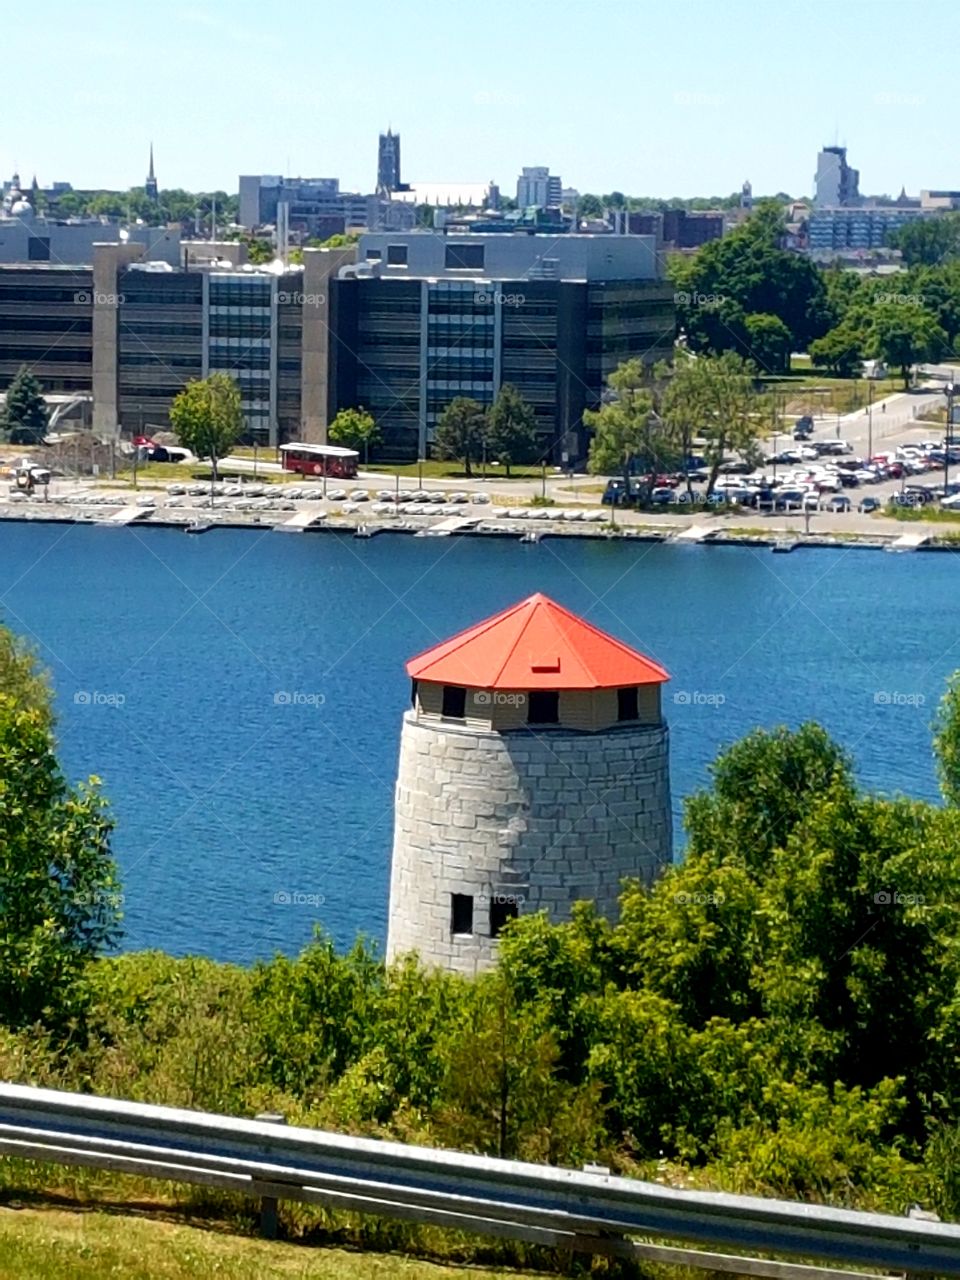 Lighthouse on the beautiful, crisp, blue waters. Found in Ottawa